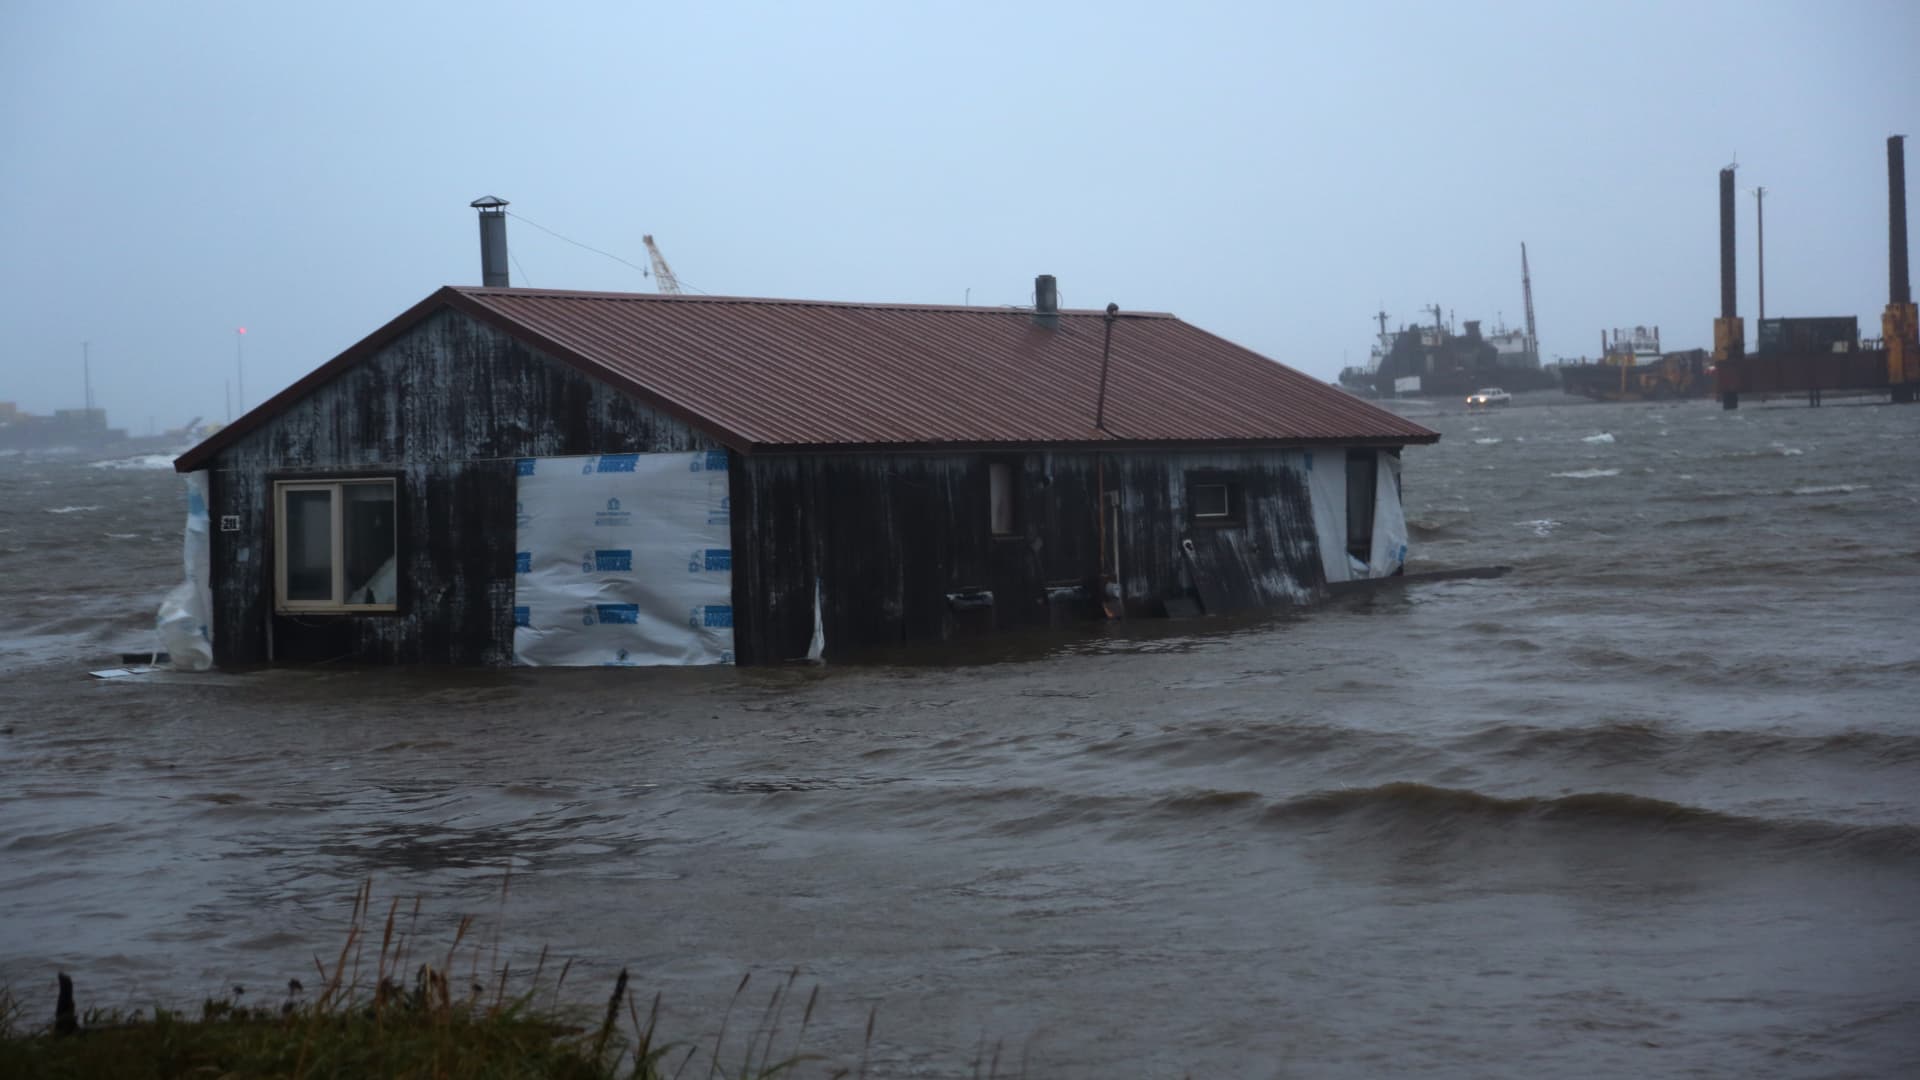 Alaska in the grip of floods, power outage near heavy storm